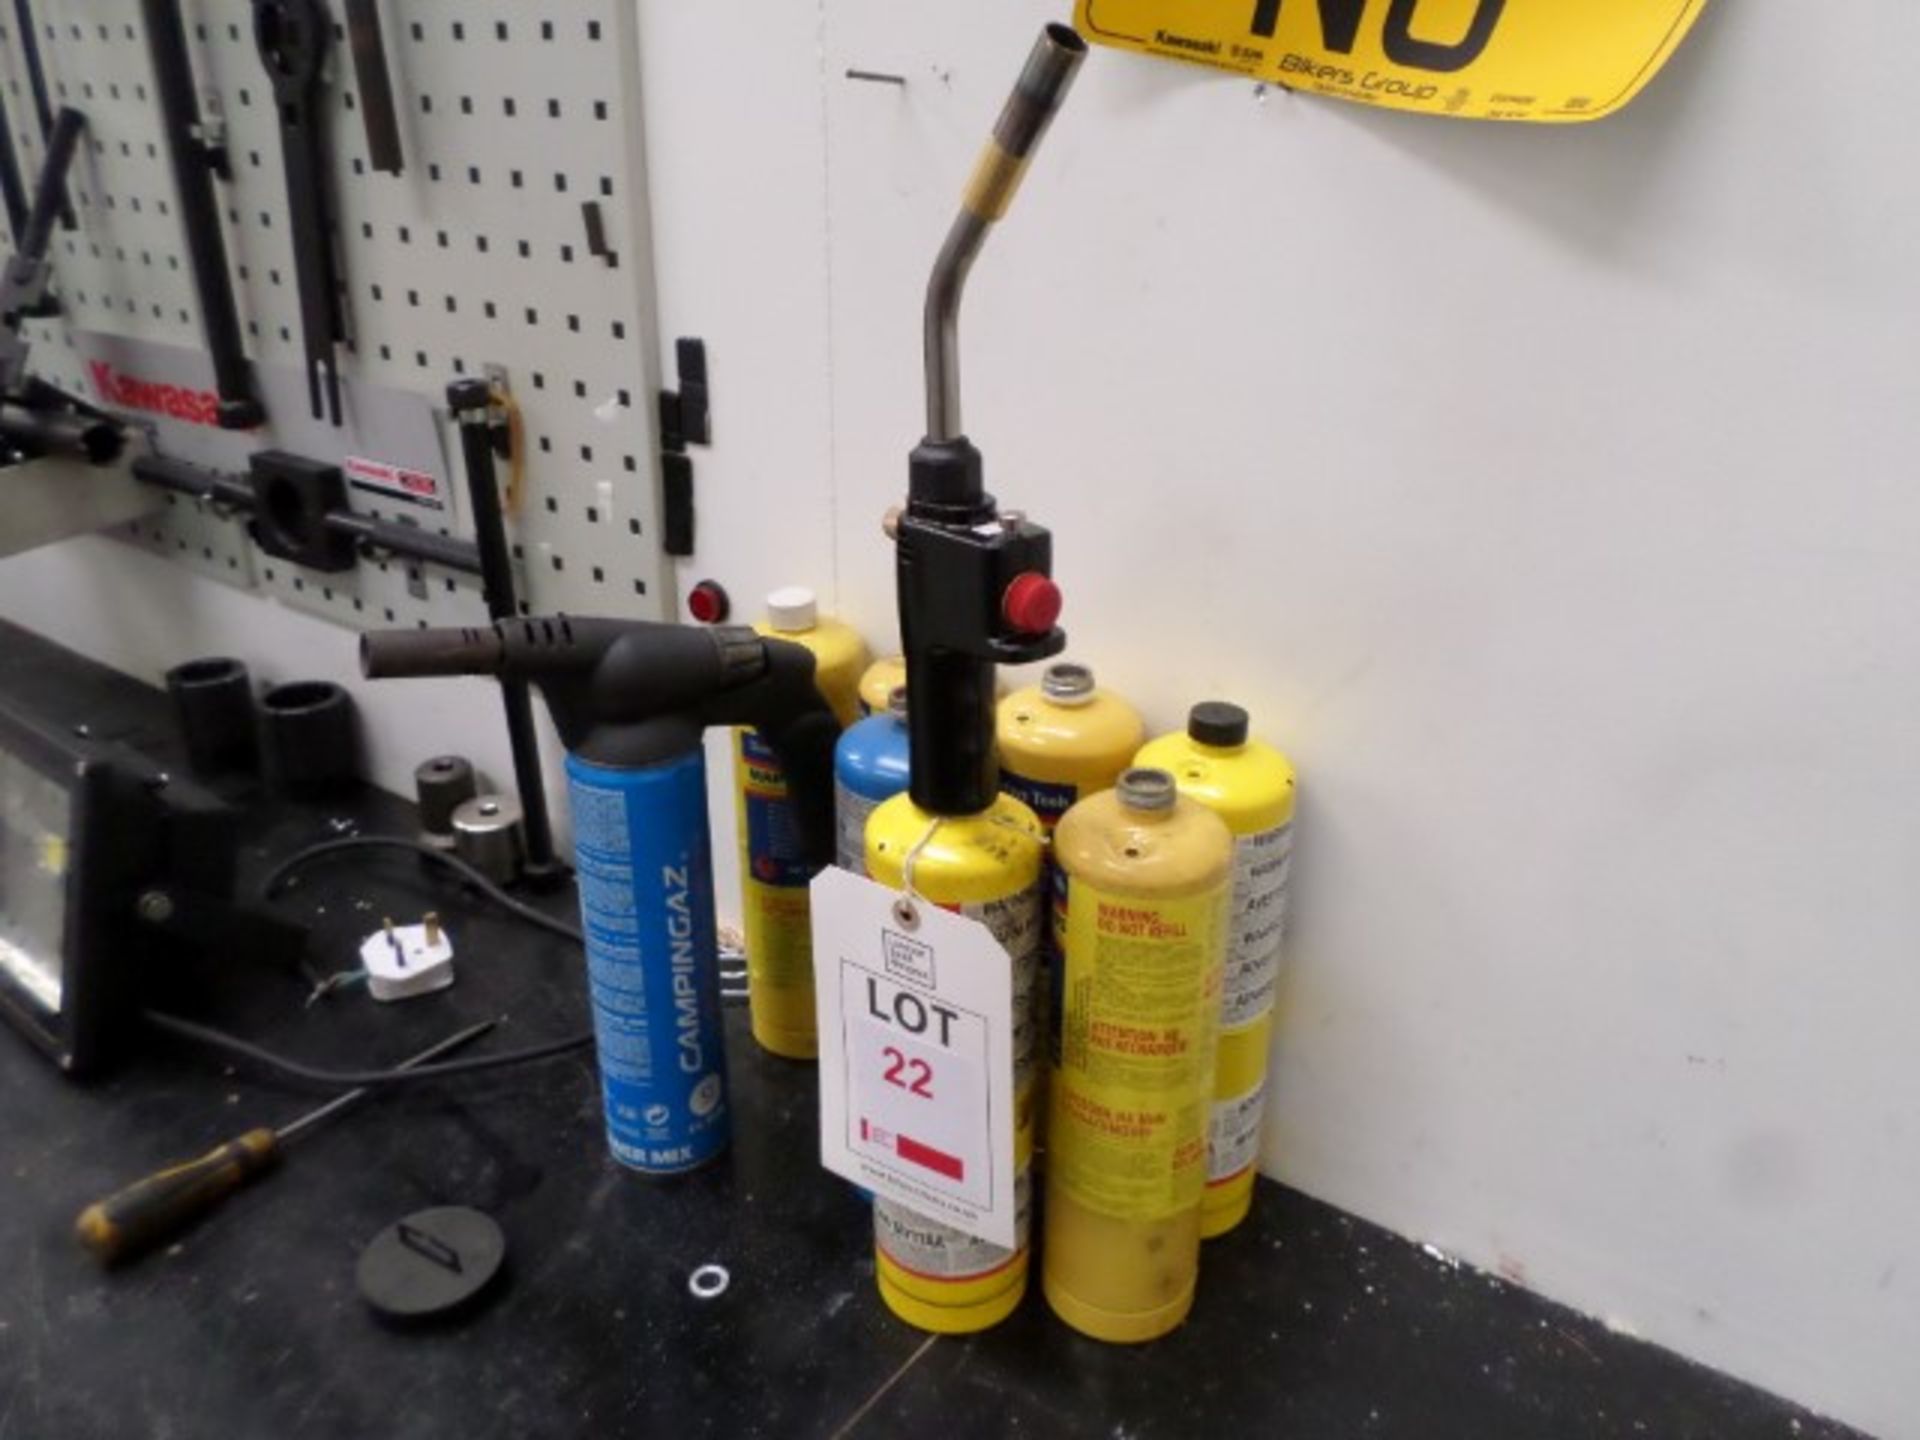 2 Butane/ Propane blow torches and 5 spare gas bottles